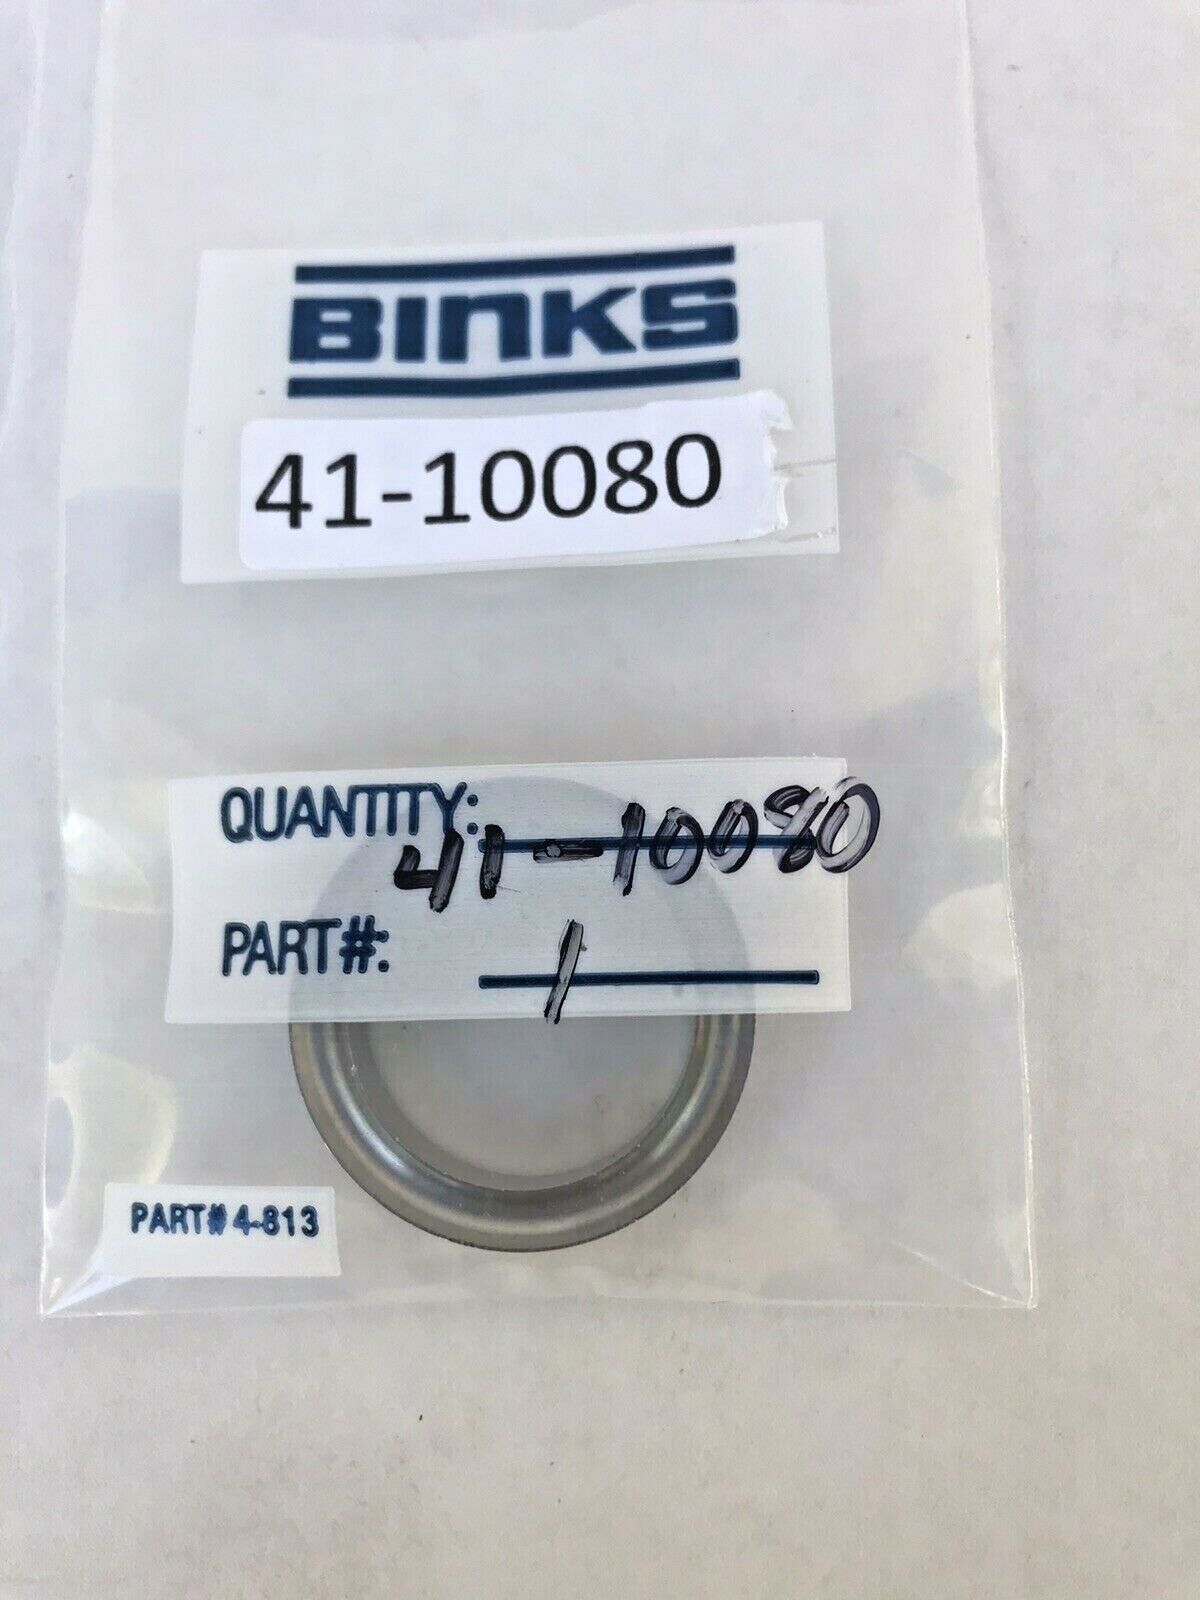 ONE LOT OF 7 BINKS SKU'S = RETAINERS / GLANDS / RETAINERS AND GASKETS - 20 ITEMS Binks 41-10075 / 41-10080 / 41-10083 MORE - фотография #7